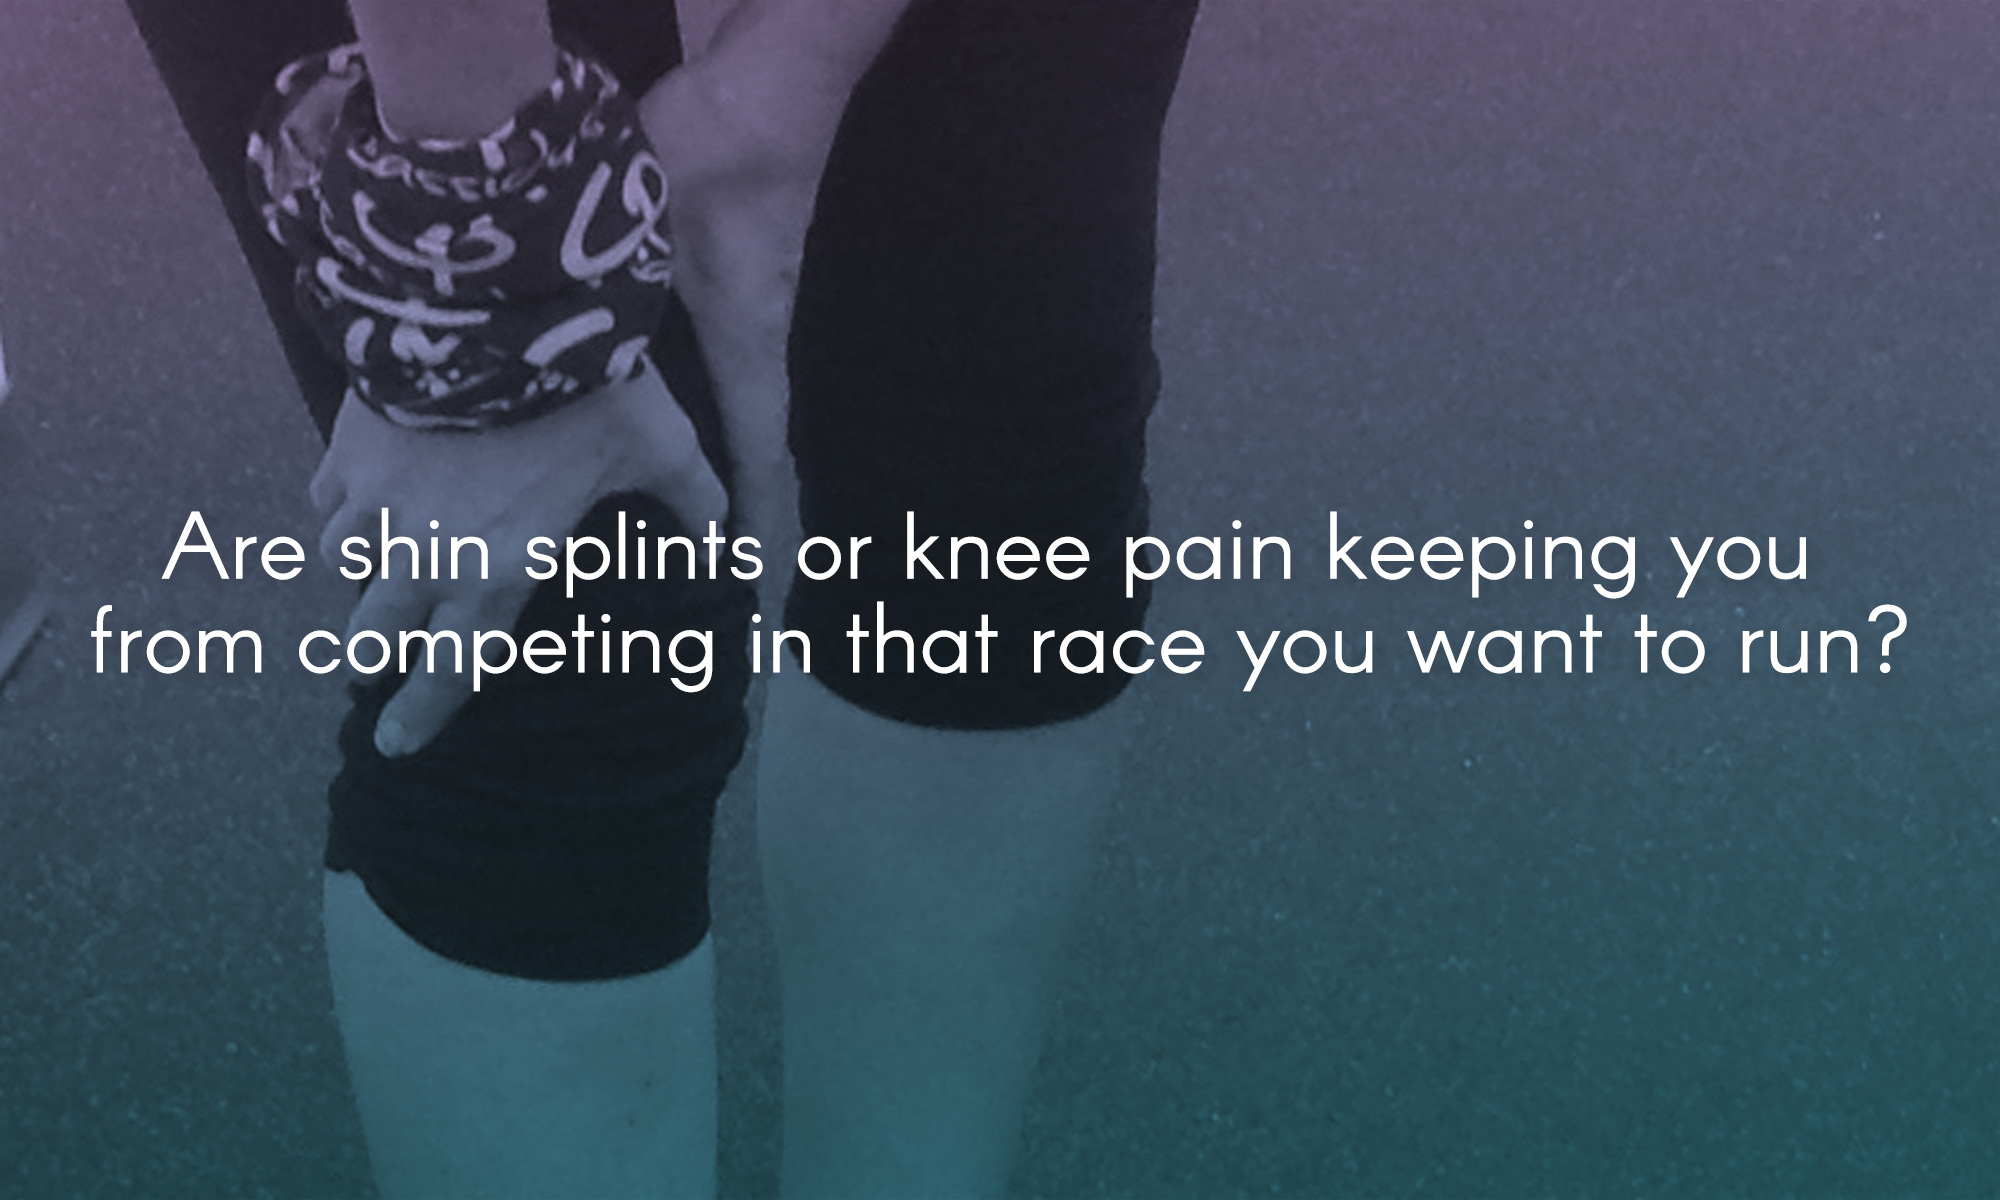  Are shin splints or knee pain keeping you from competing in that race you want to run? 